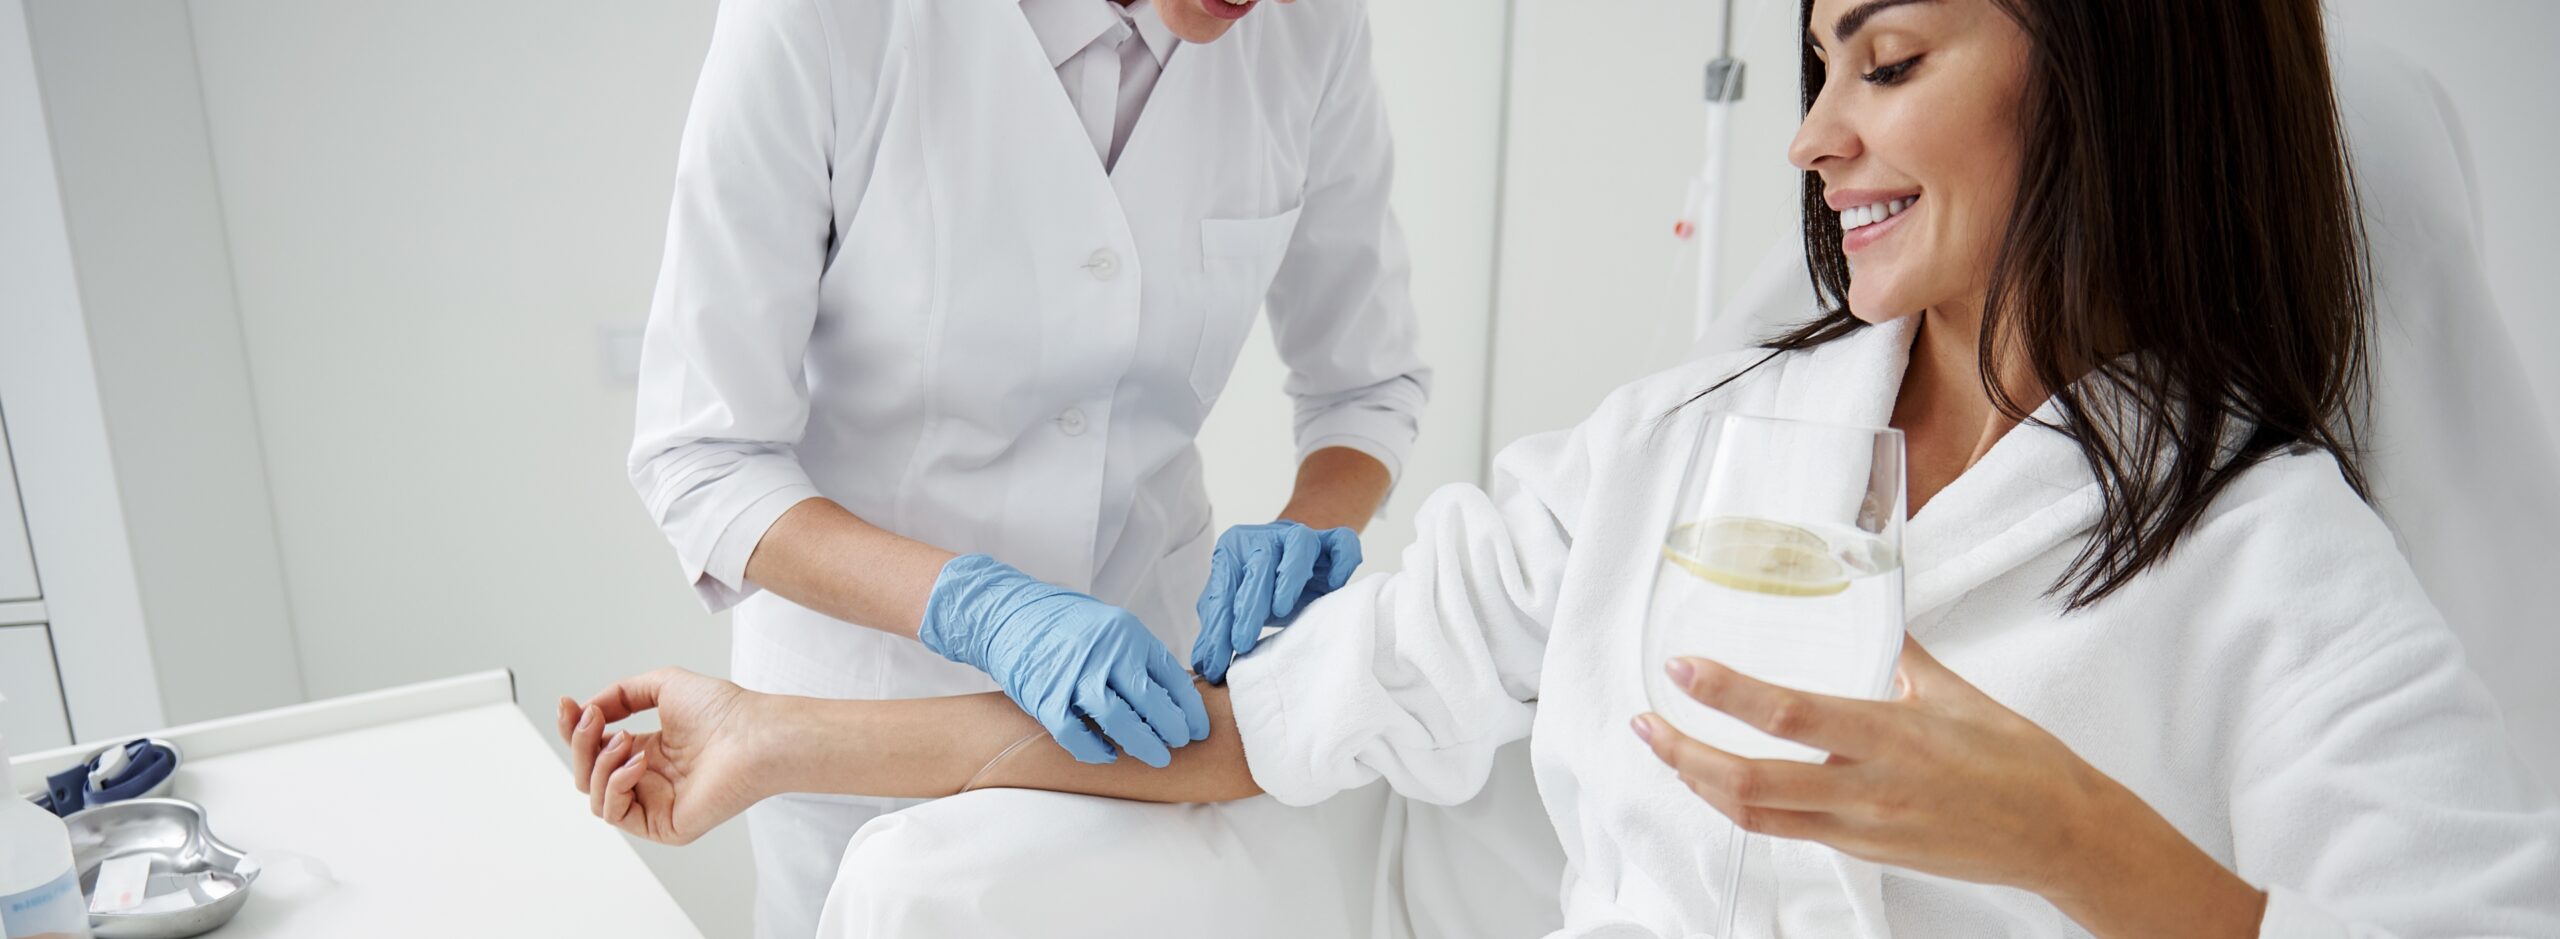 woman holding a glass of lemon water receiving iv nutritional therapy